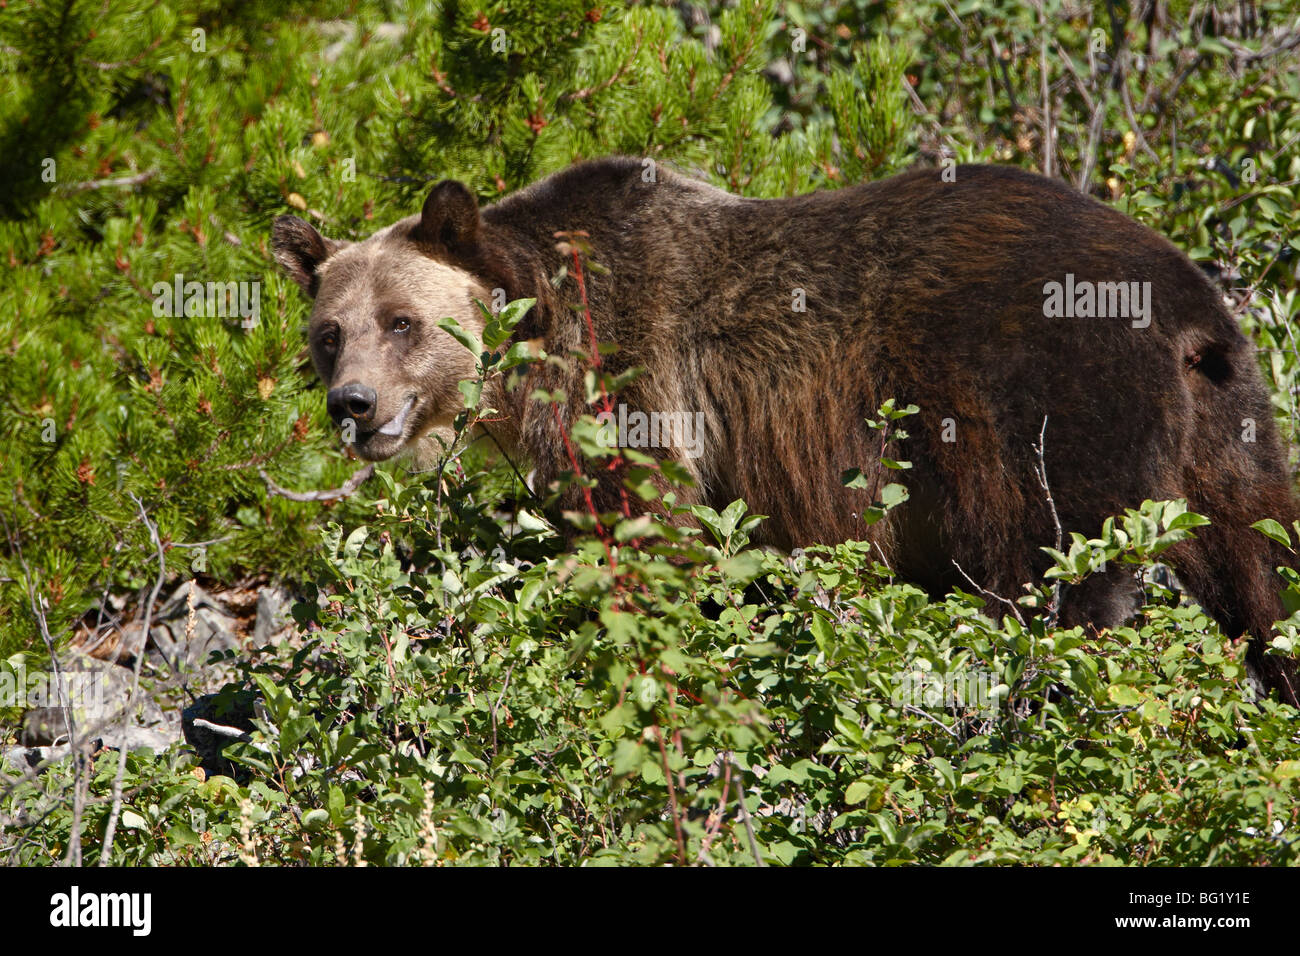 Grizzly bear (Ursus horribilis), Glacier National Park, Montana, United States of America, North America Stock Photo